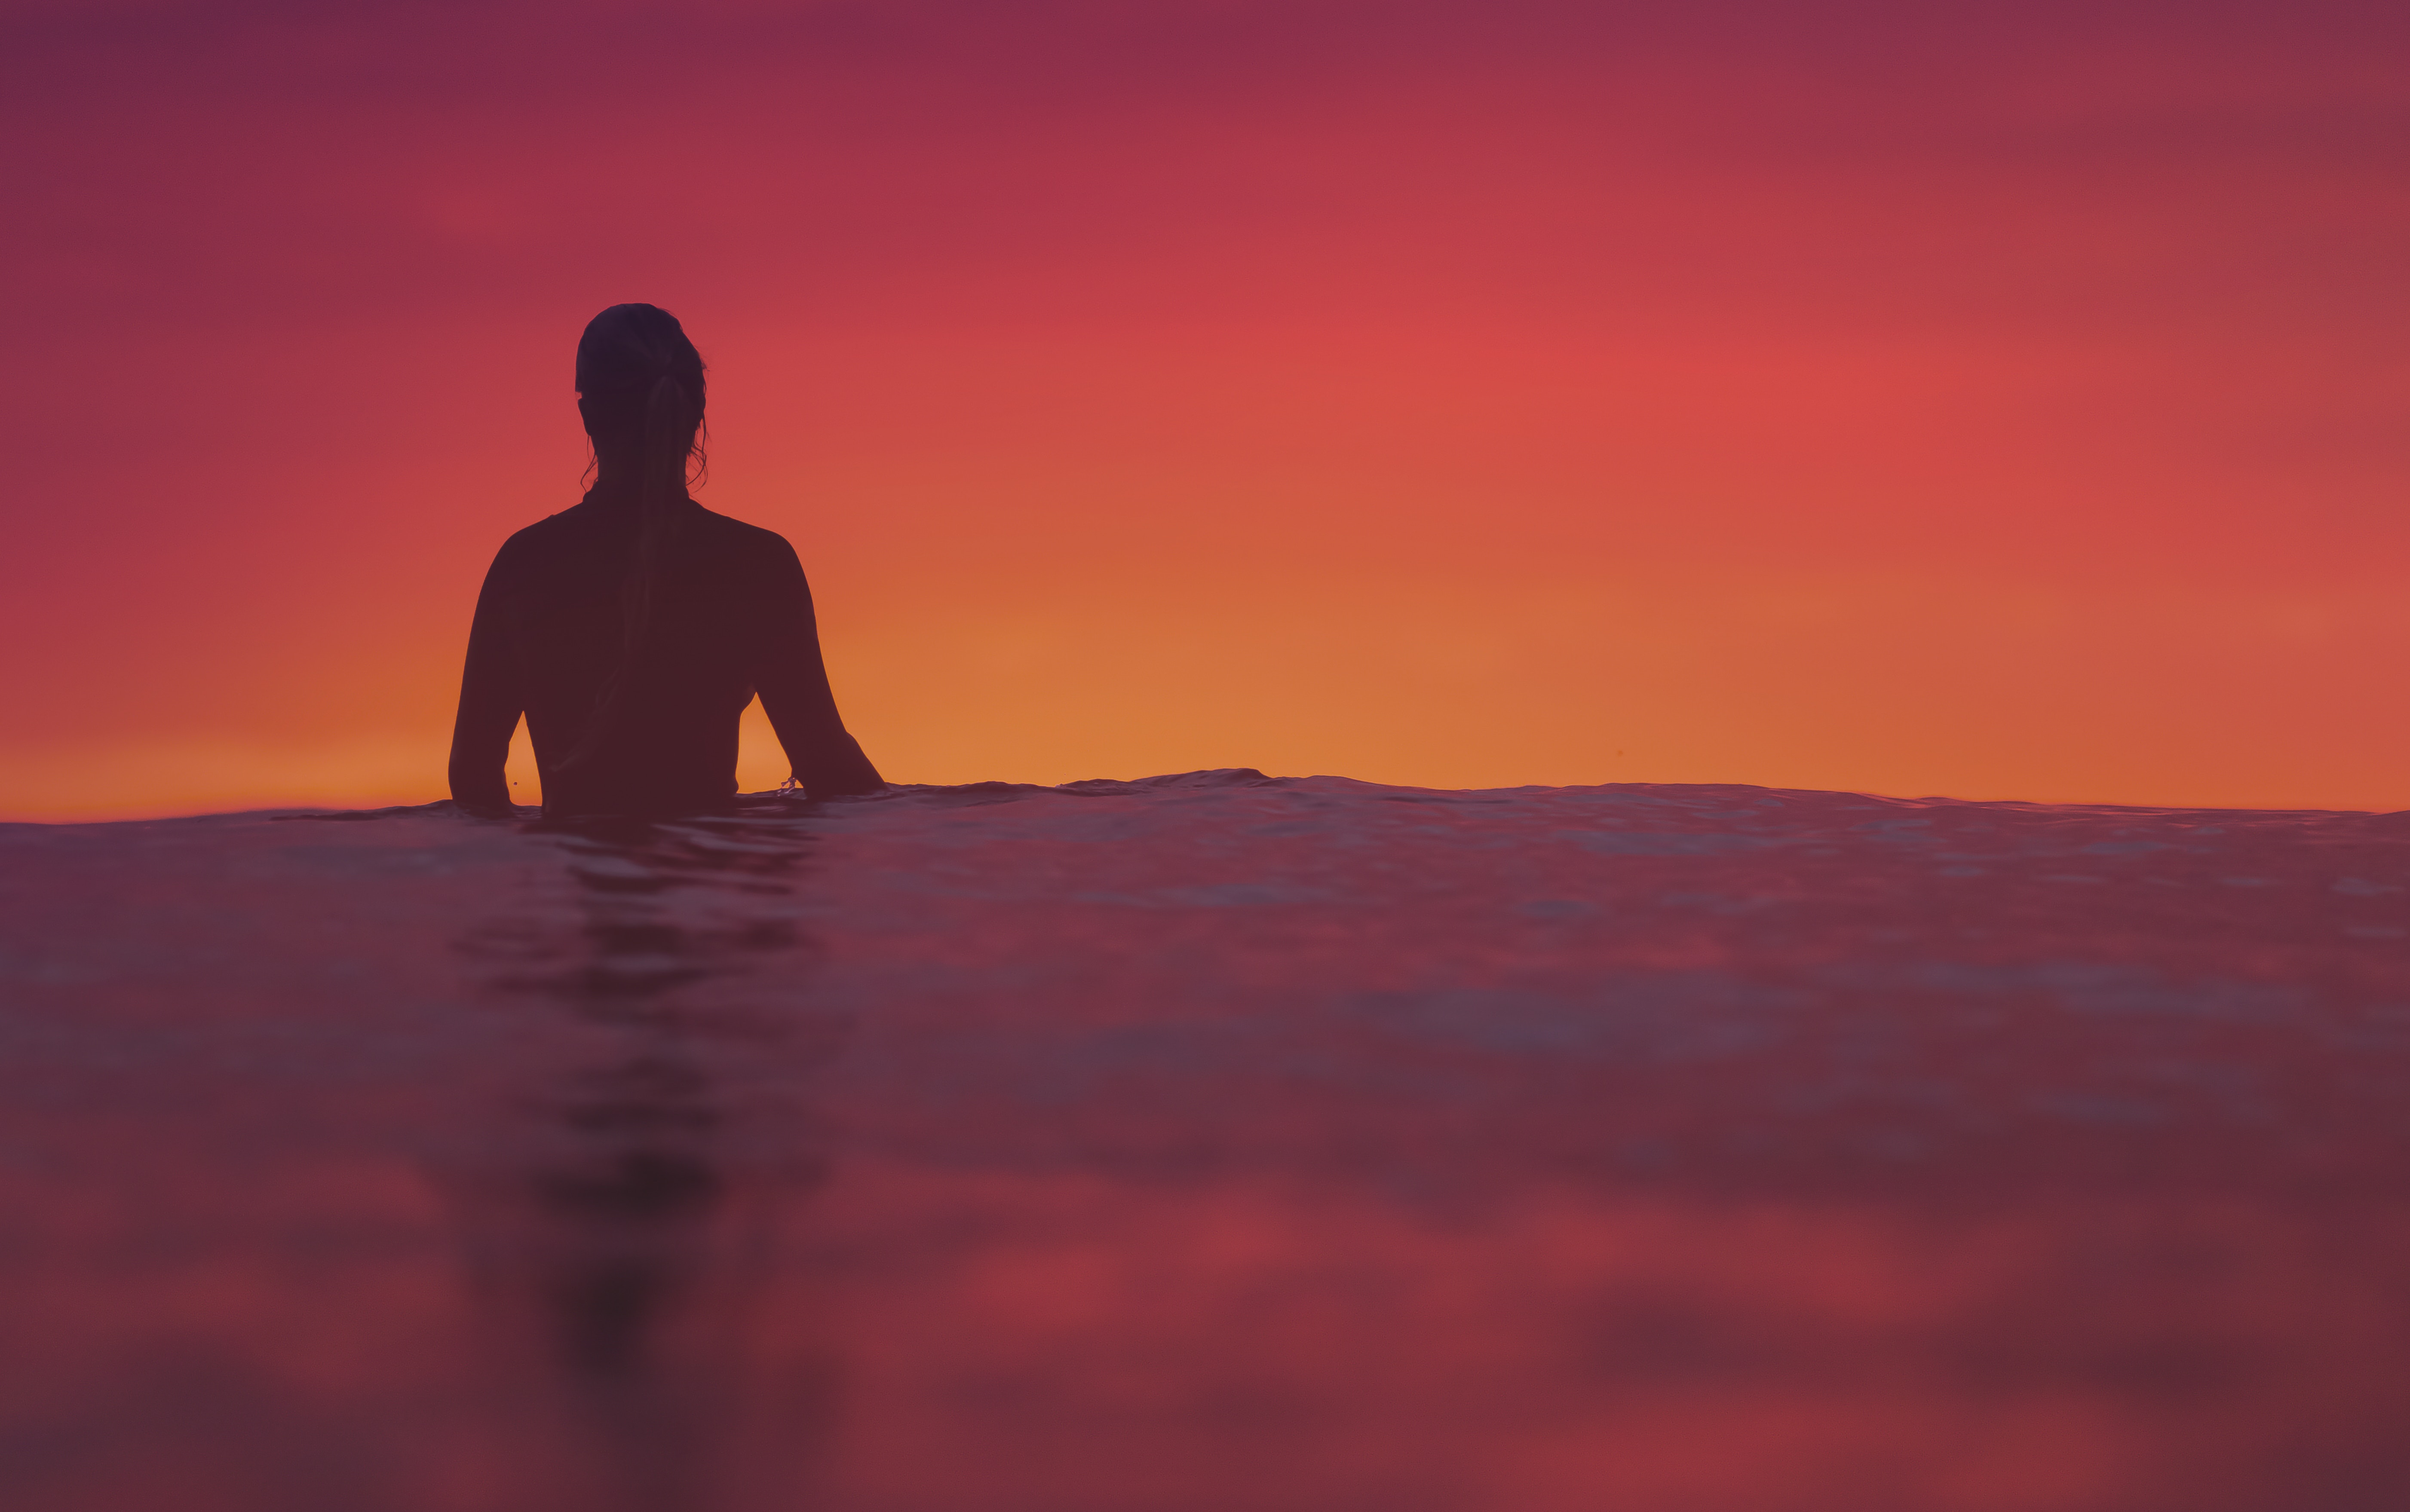 5606x3518 #summer wallpaper, #silhouette, #sea, #summer background, #person, #orange, #reflection, #pink, #water, #Free image, #sunset, #wallpaper, #color, #sunrise, #surf, #standing, #ocean, #back, #red, #blue, #surfing. Mocah.org HD